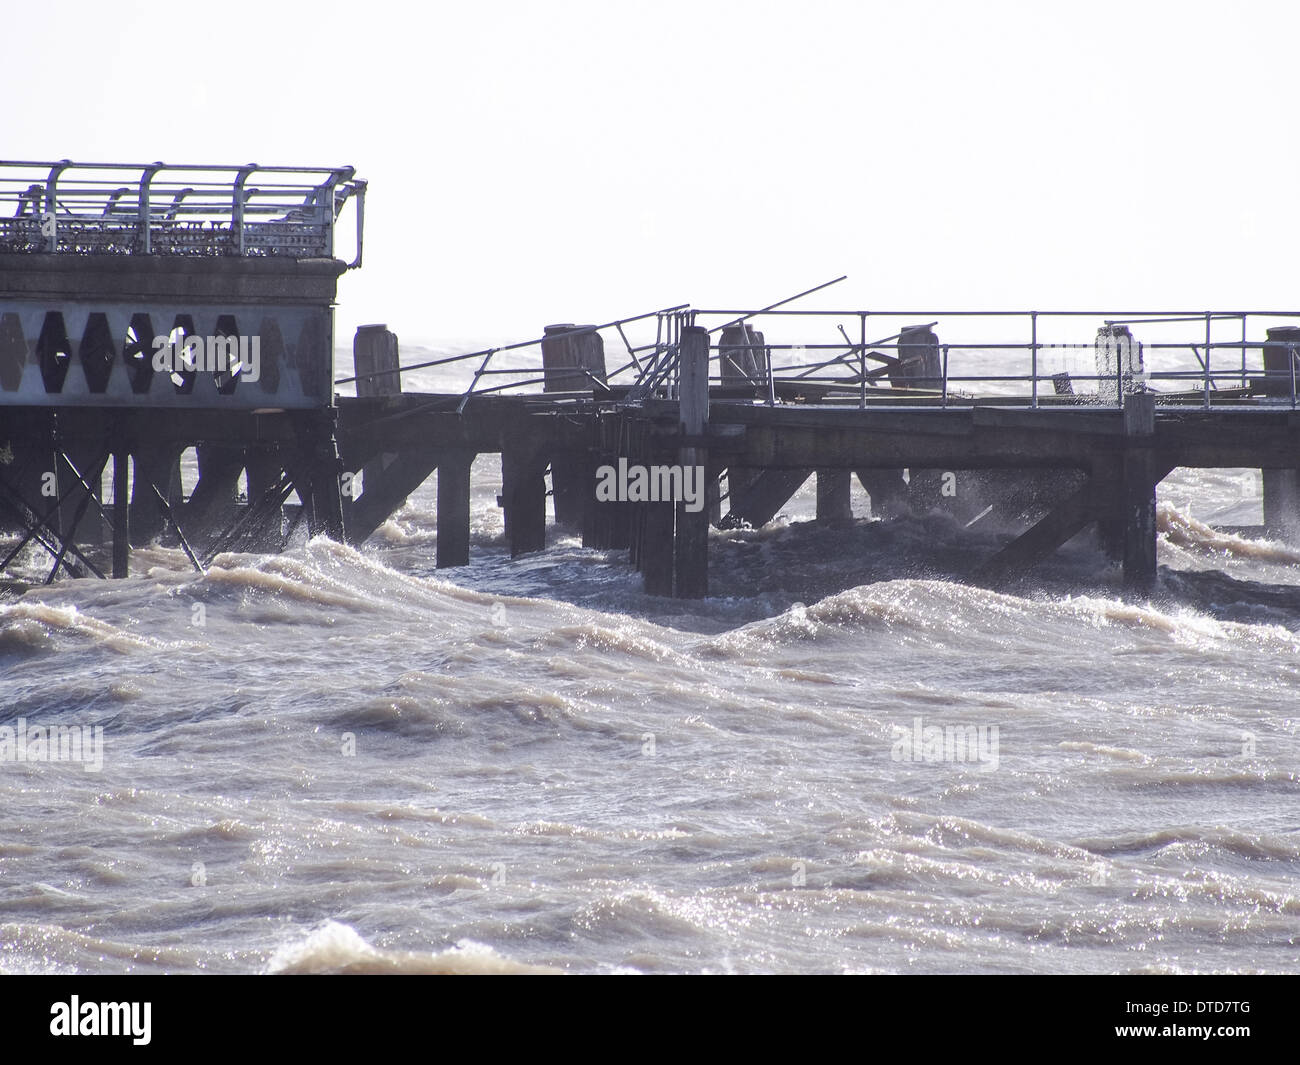 Portsmouth, Hampshire, England 15th february 2014. South Parade pier stands damaged in the solent due to high winds and large waves. pieces of the Georgian structure lie along Southsea beach. The pier has been closed to the public due to structural safety issues for over a year Credit:  simon evans/Alamy Live News Stock Photo